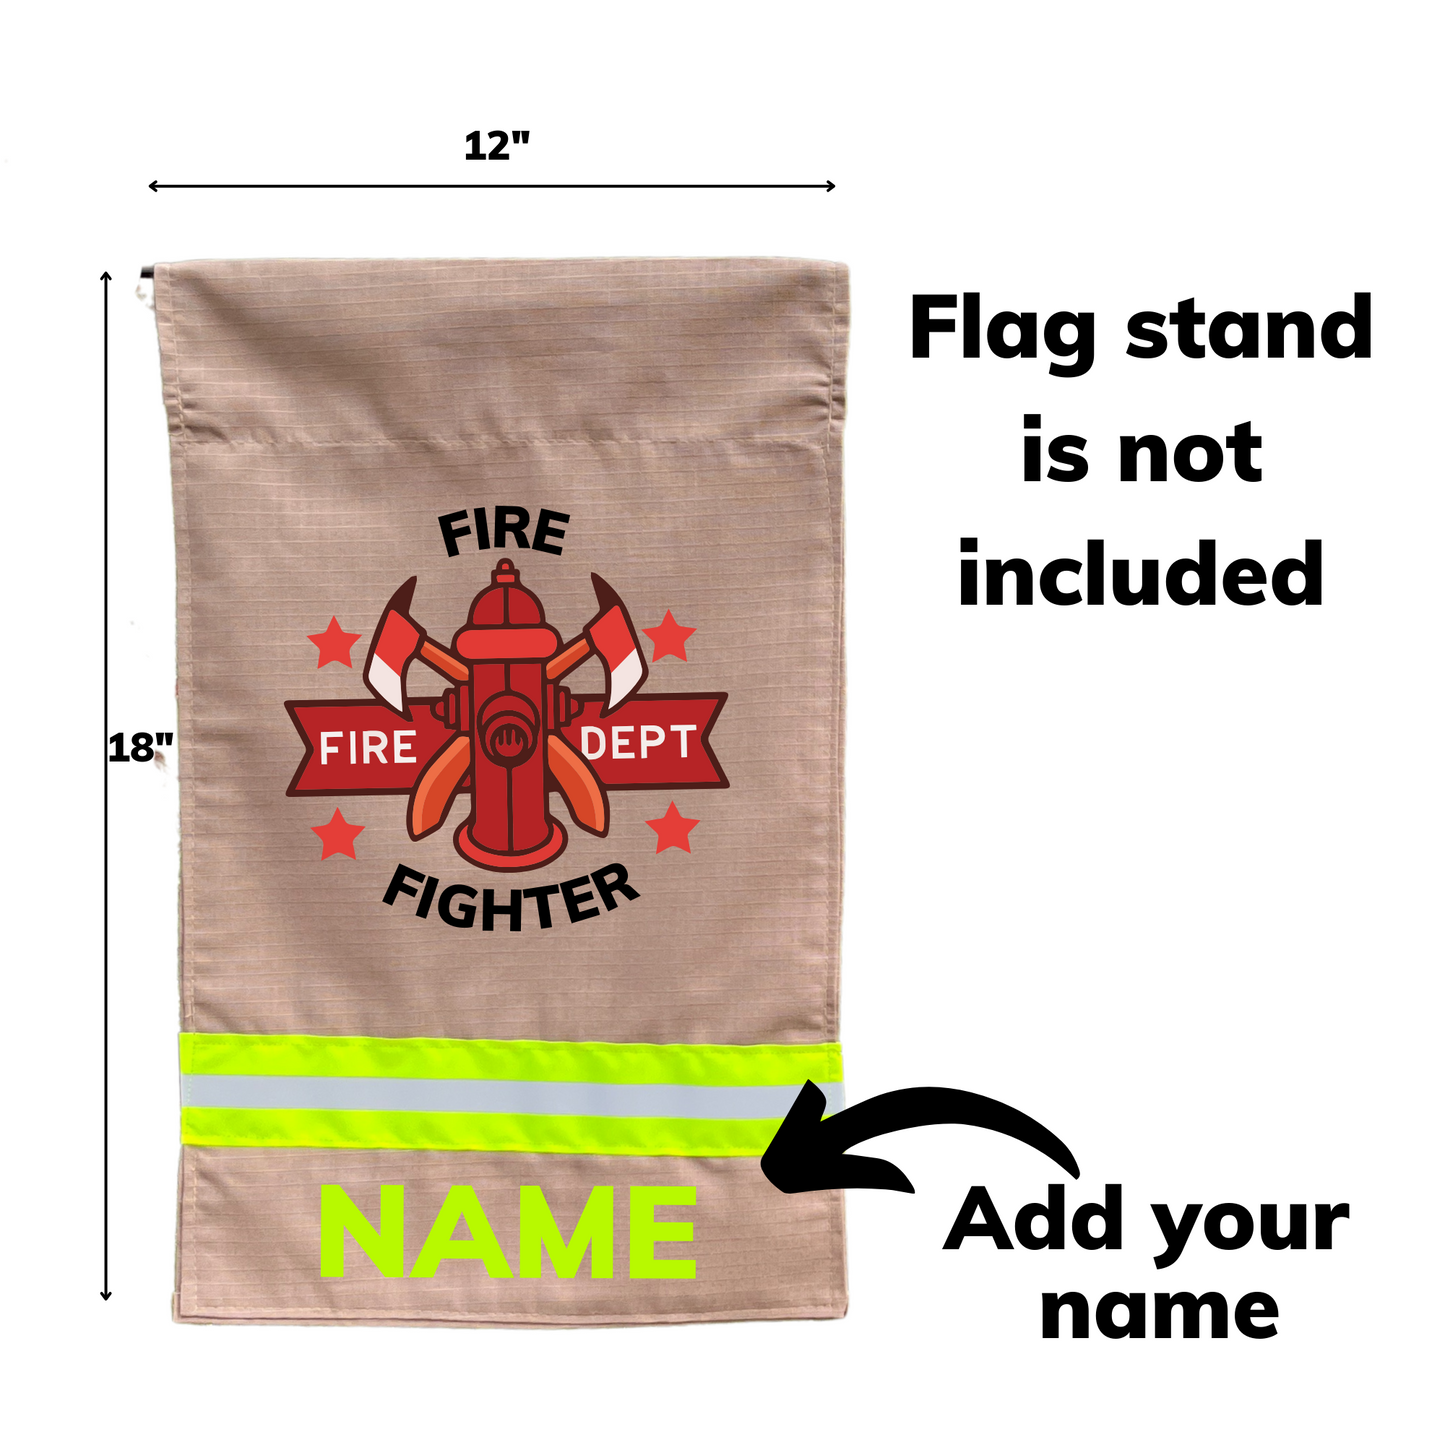 flag size 12 inches by 18 inches  add a name to the bottom of the flag. Flag stand not included